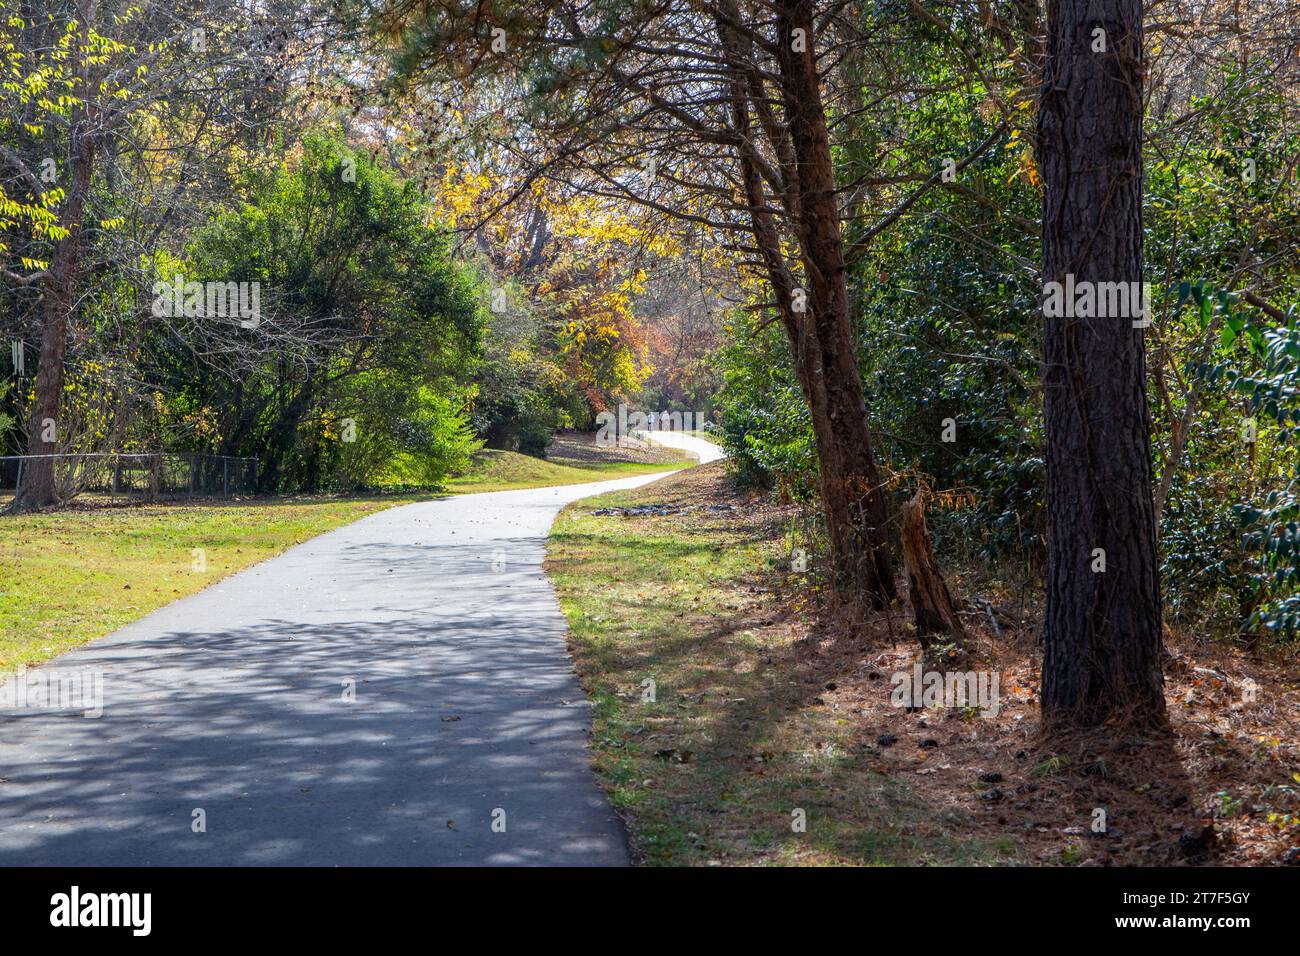 Two distant bicyclists ride on a paved trail through an autumn scene of changing leaves. Stock Photo